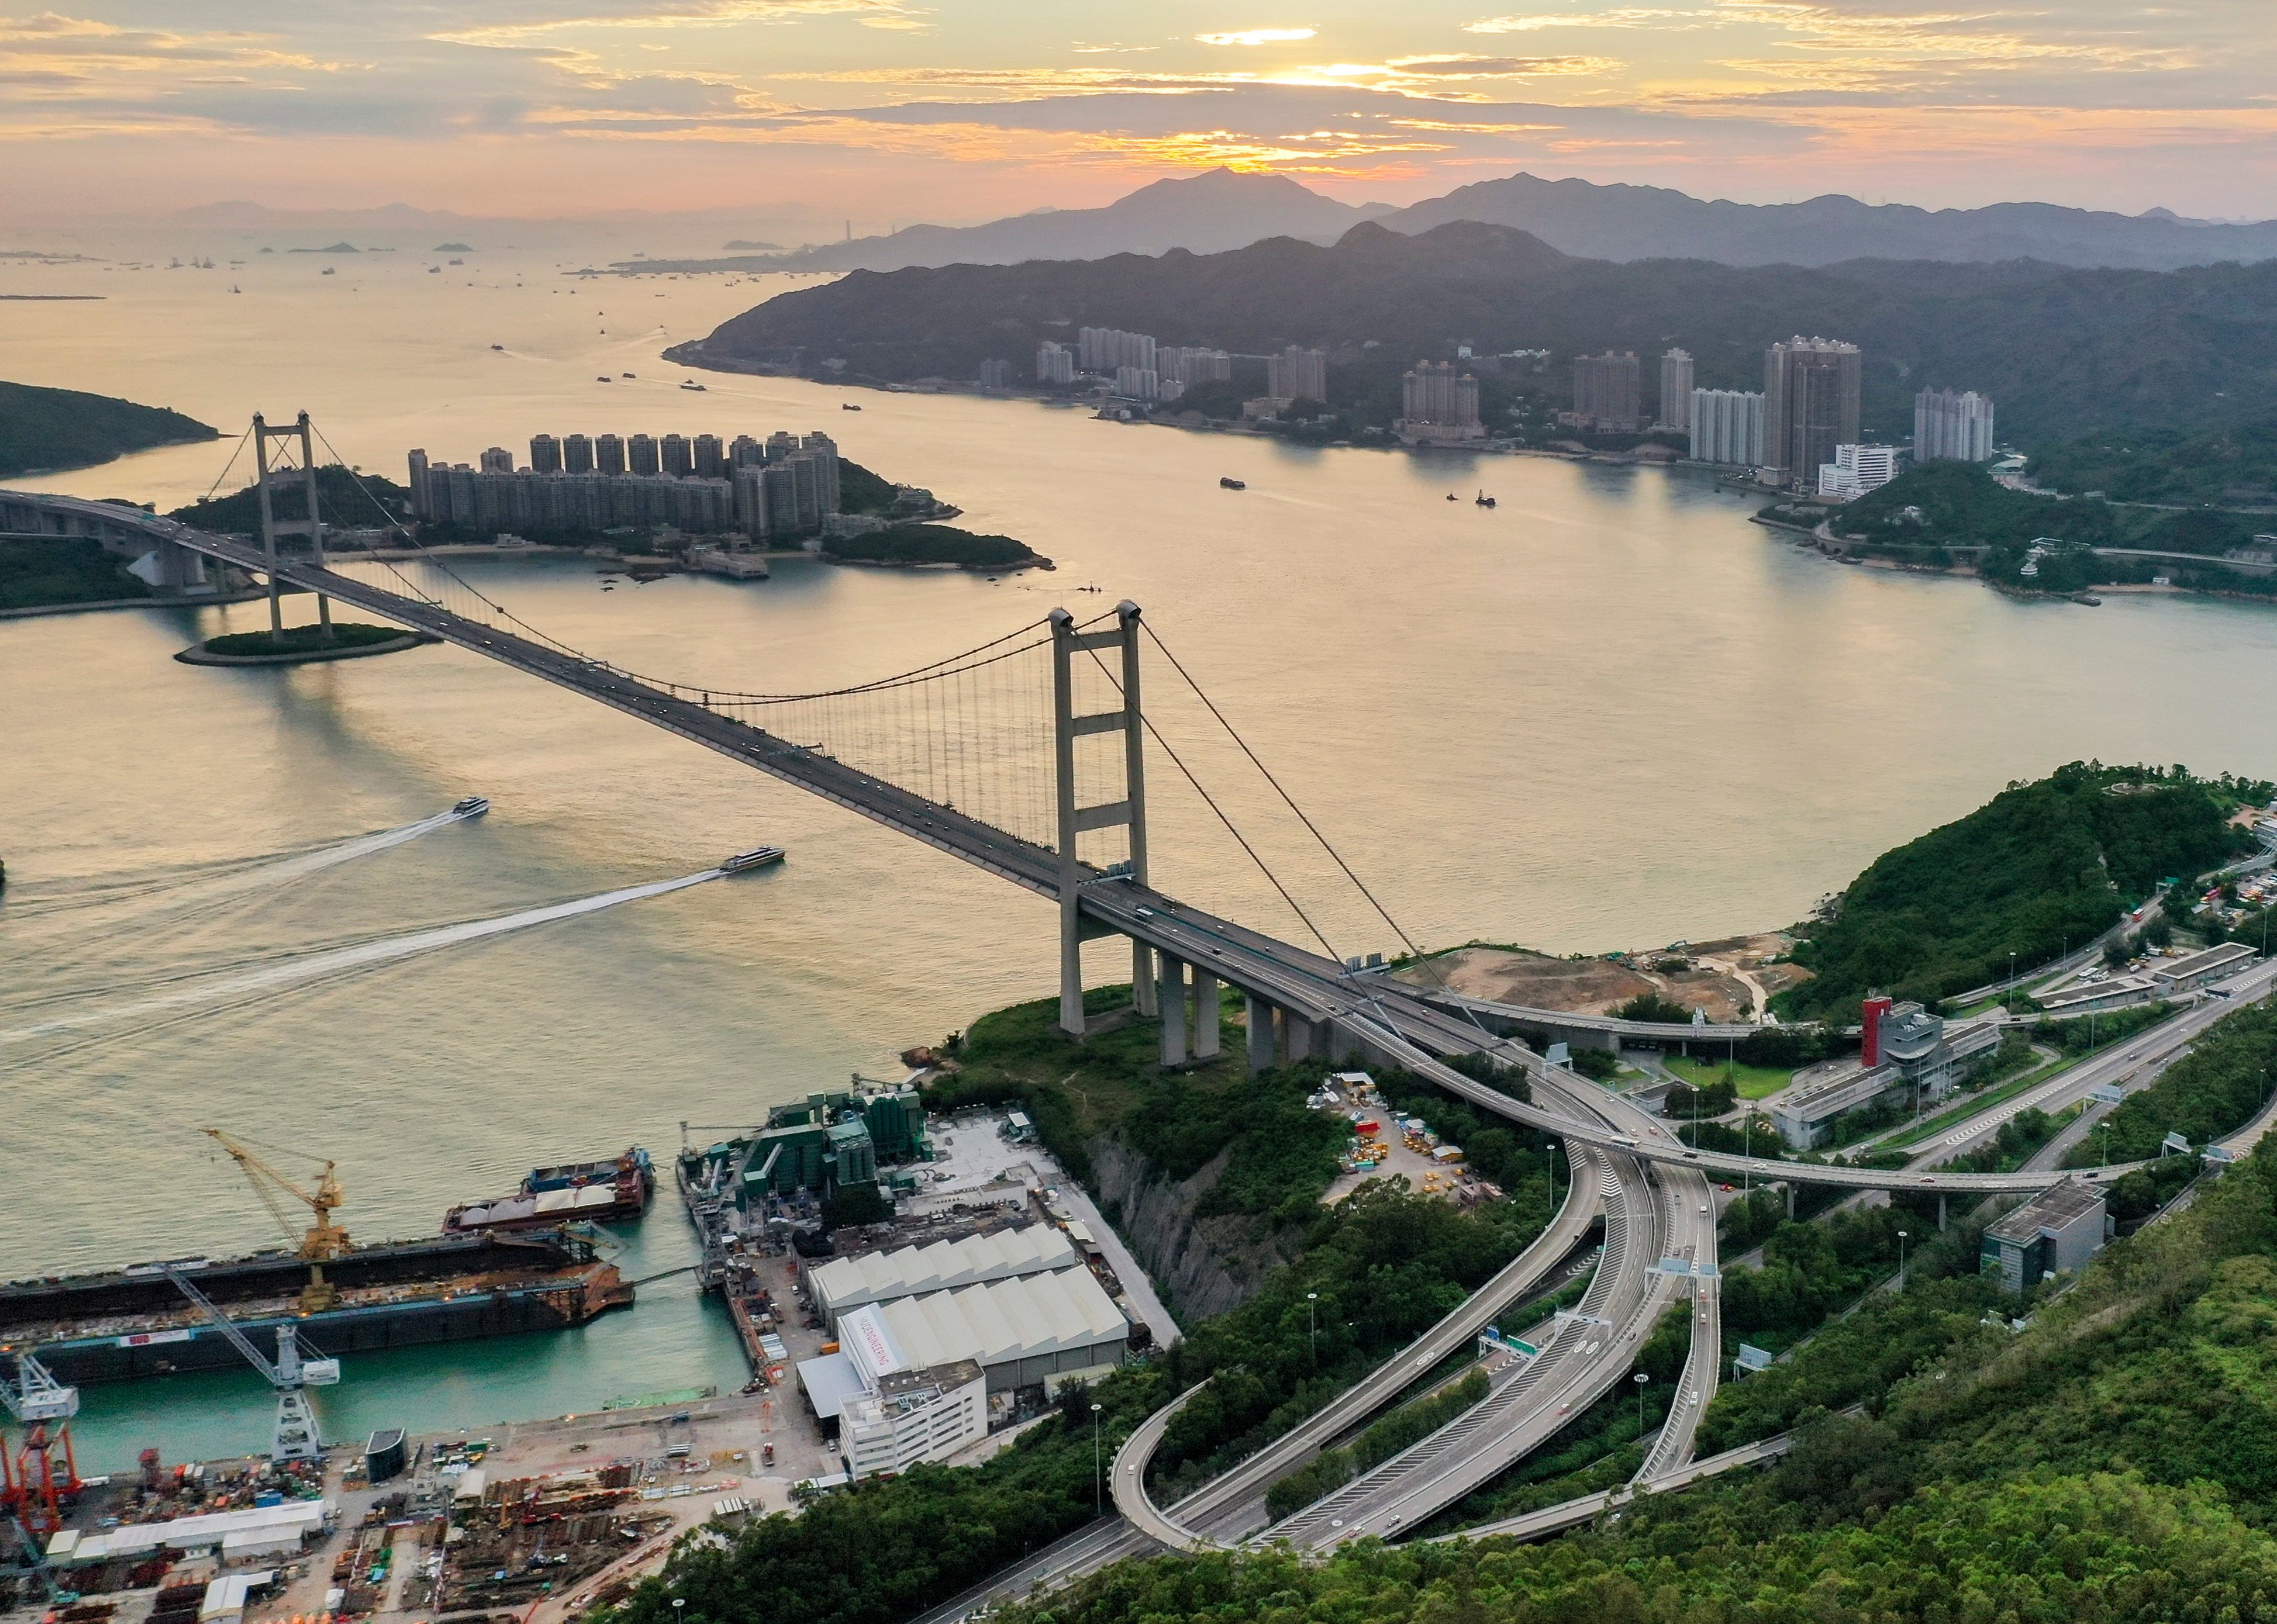 The Tsing Ma Bridge is one of world’s longest suspension bridges, and it connects two islands in Hong Kong: Tsing Yi and Ma Wan. Photo: Martin Chan